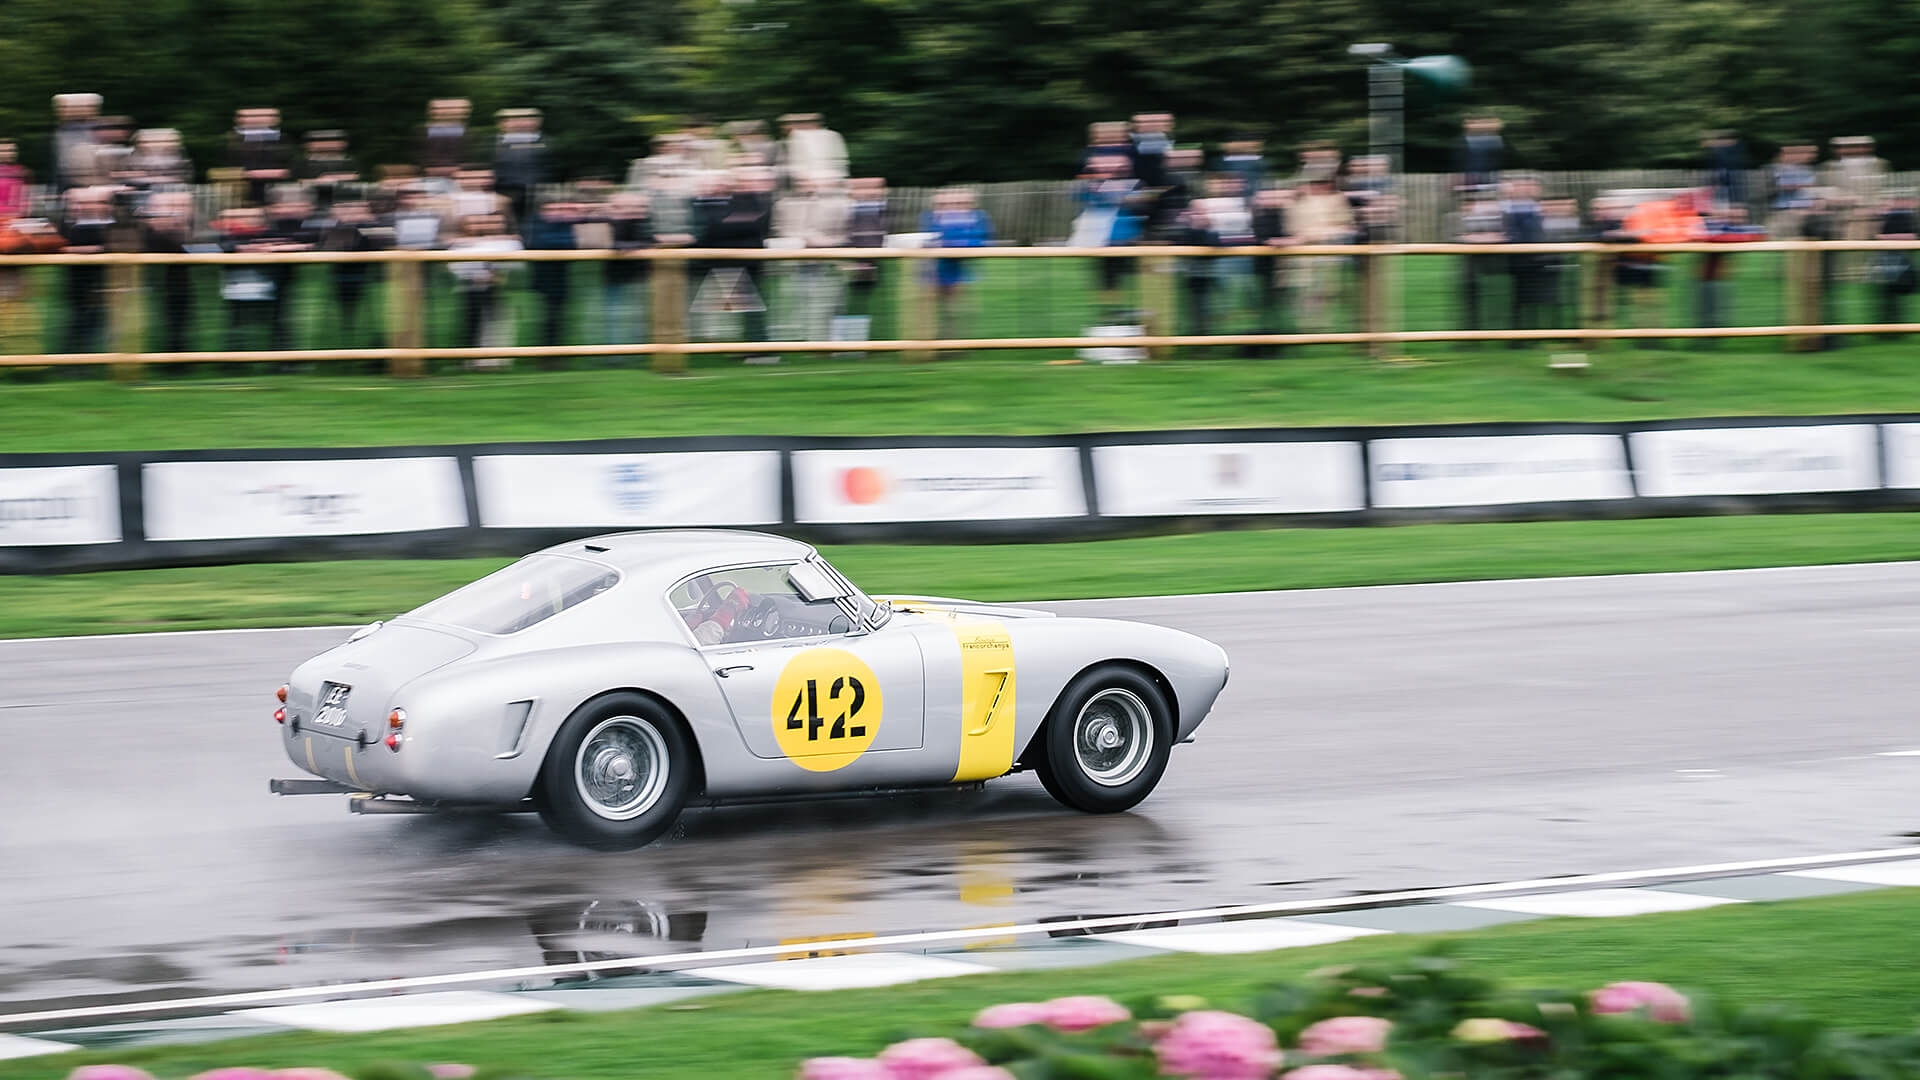 2017 Goodwood Revival: The fun starts here...